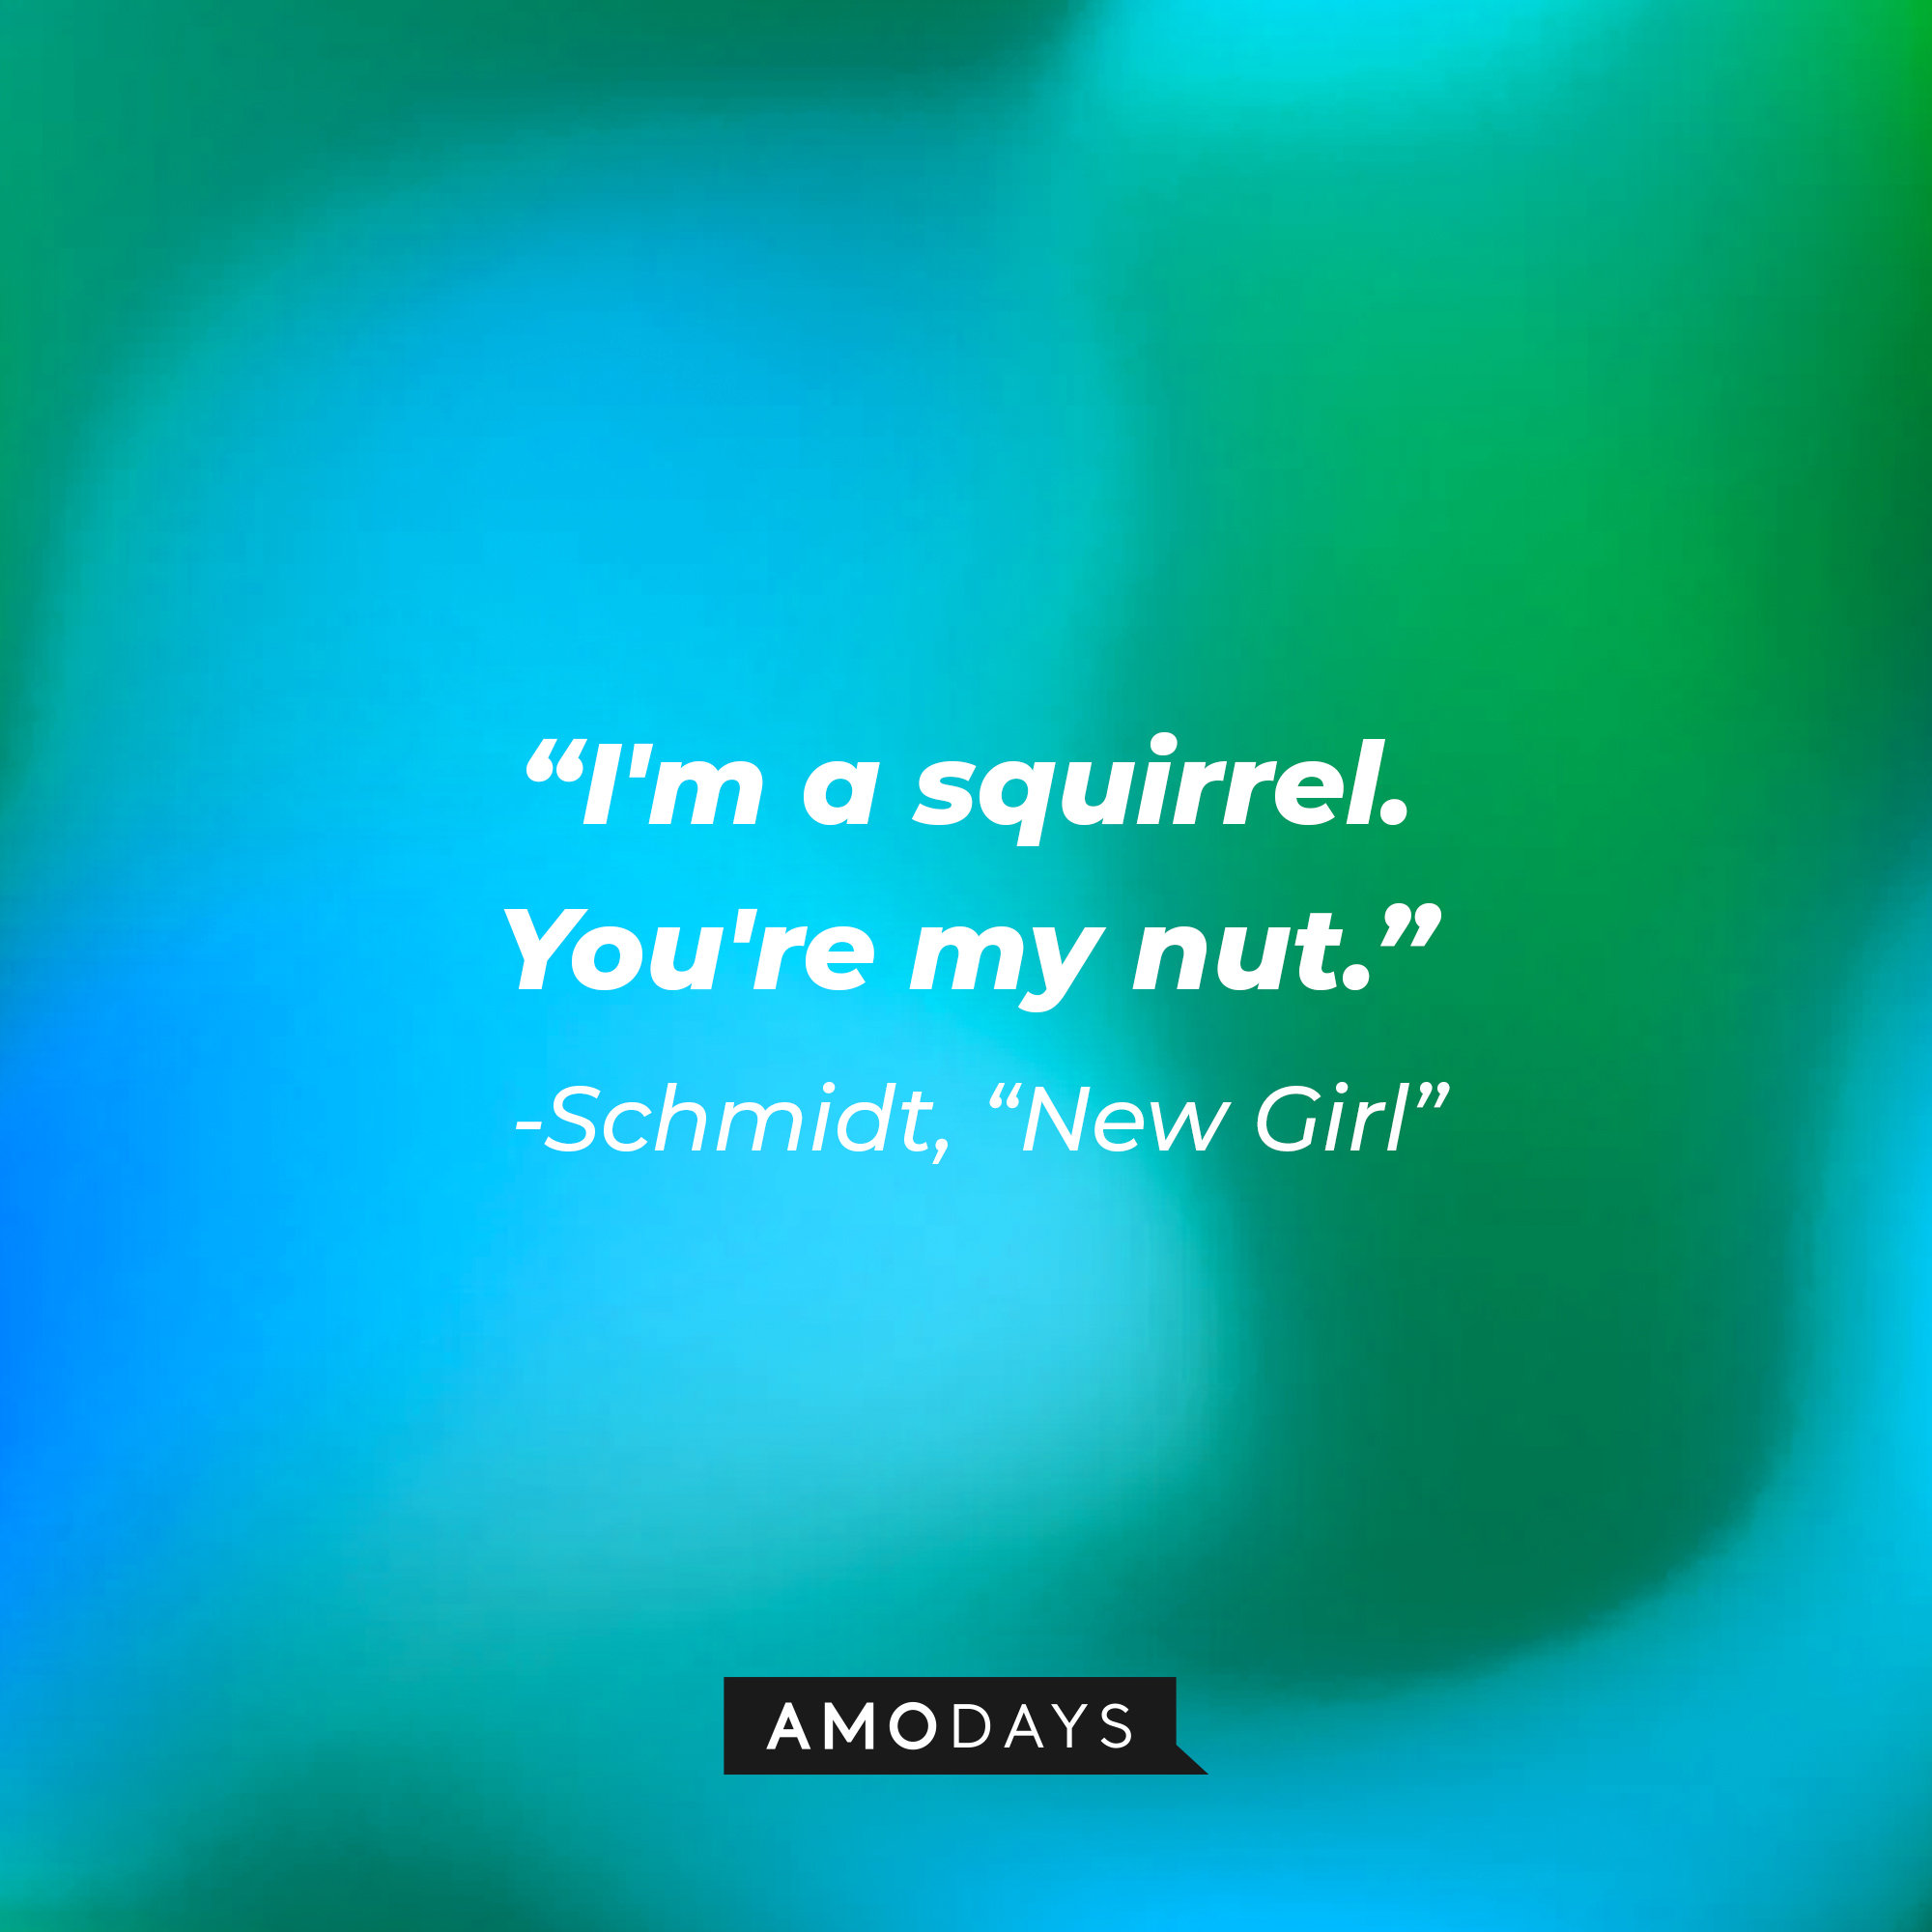 Schmidt's quote: "I'm a squirrel. You're my nut." | Source: Amodays